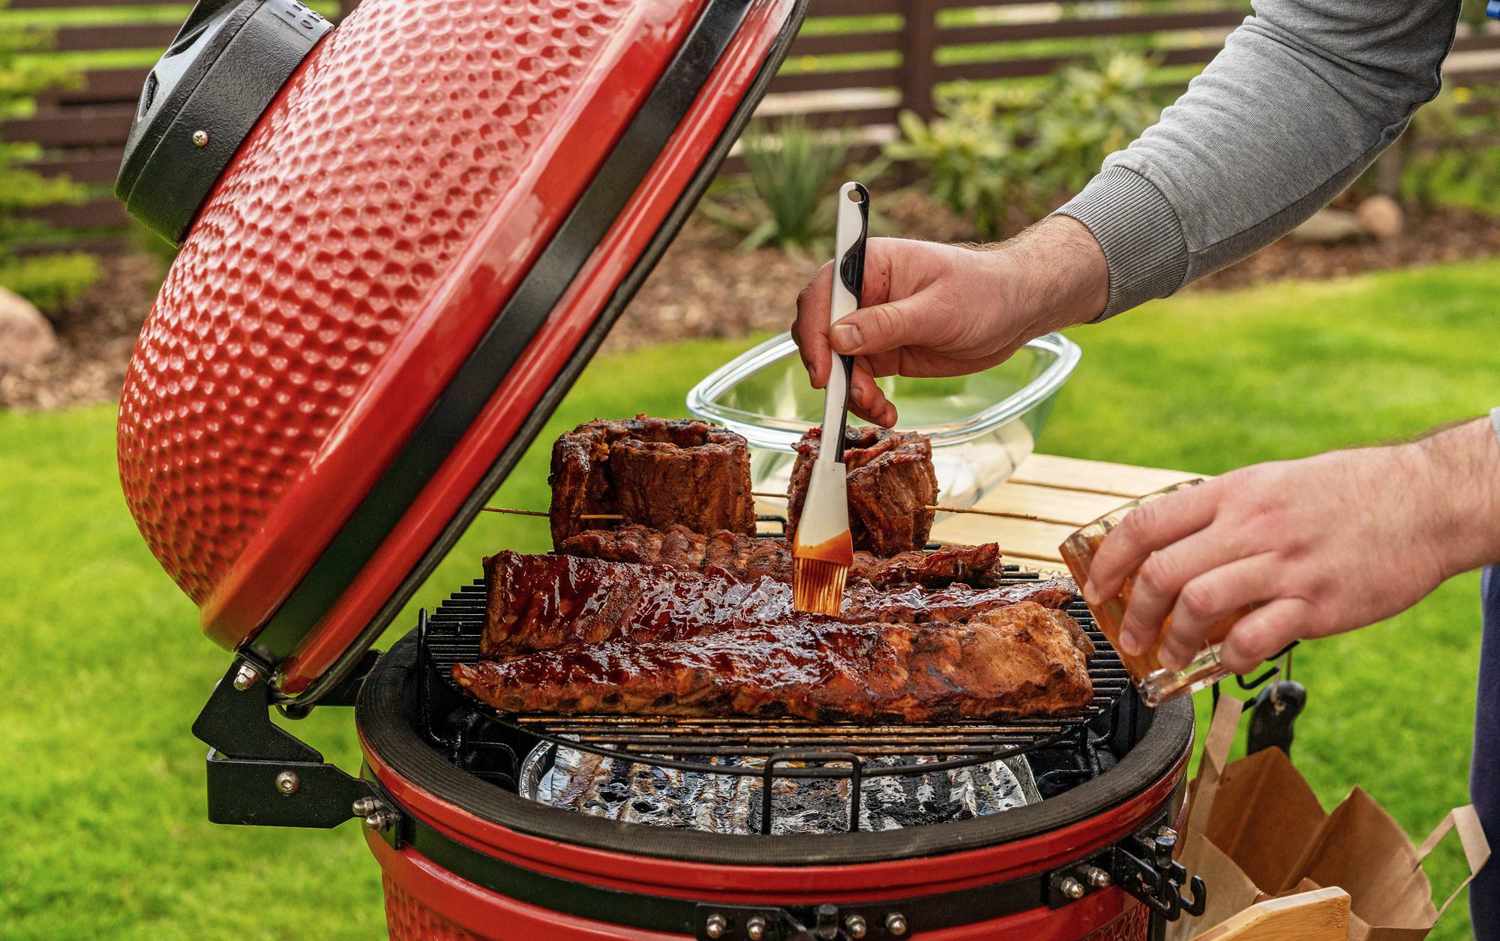 A person is brushing bbq sauce on ribs on a red smoker grill